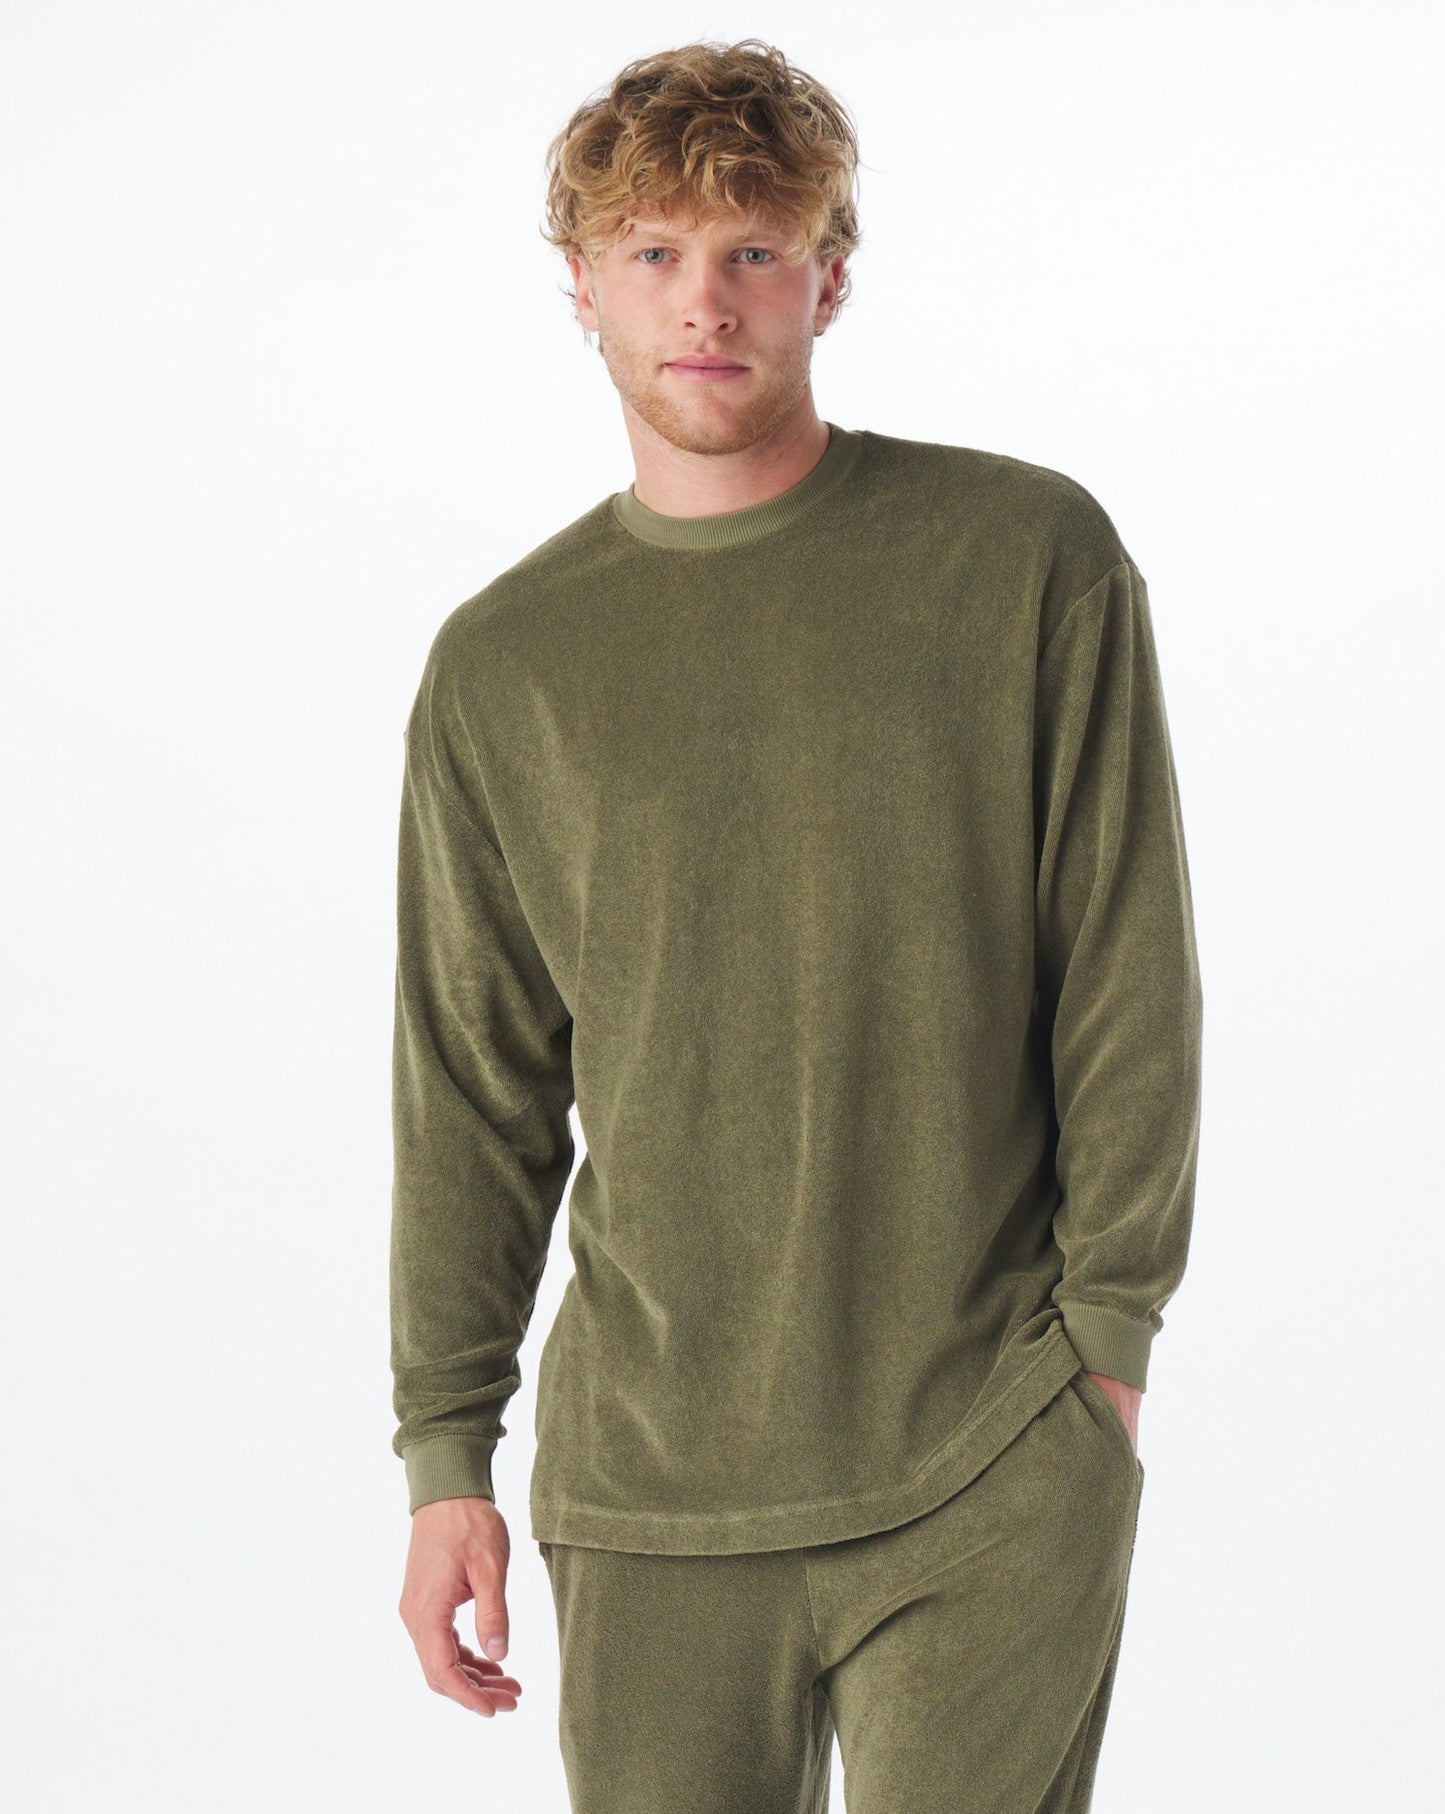 Men's Post Game Sweater, Olive / S, Tops - Brownlee